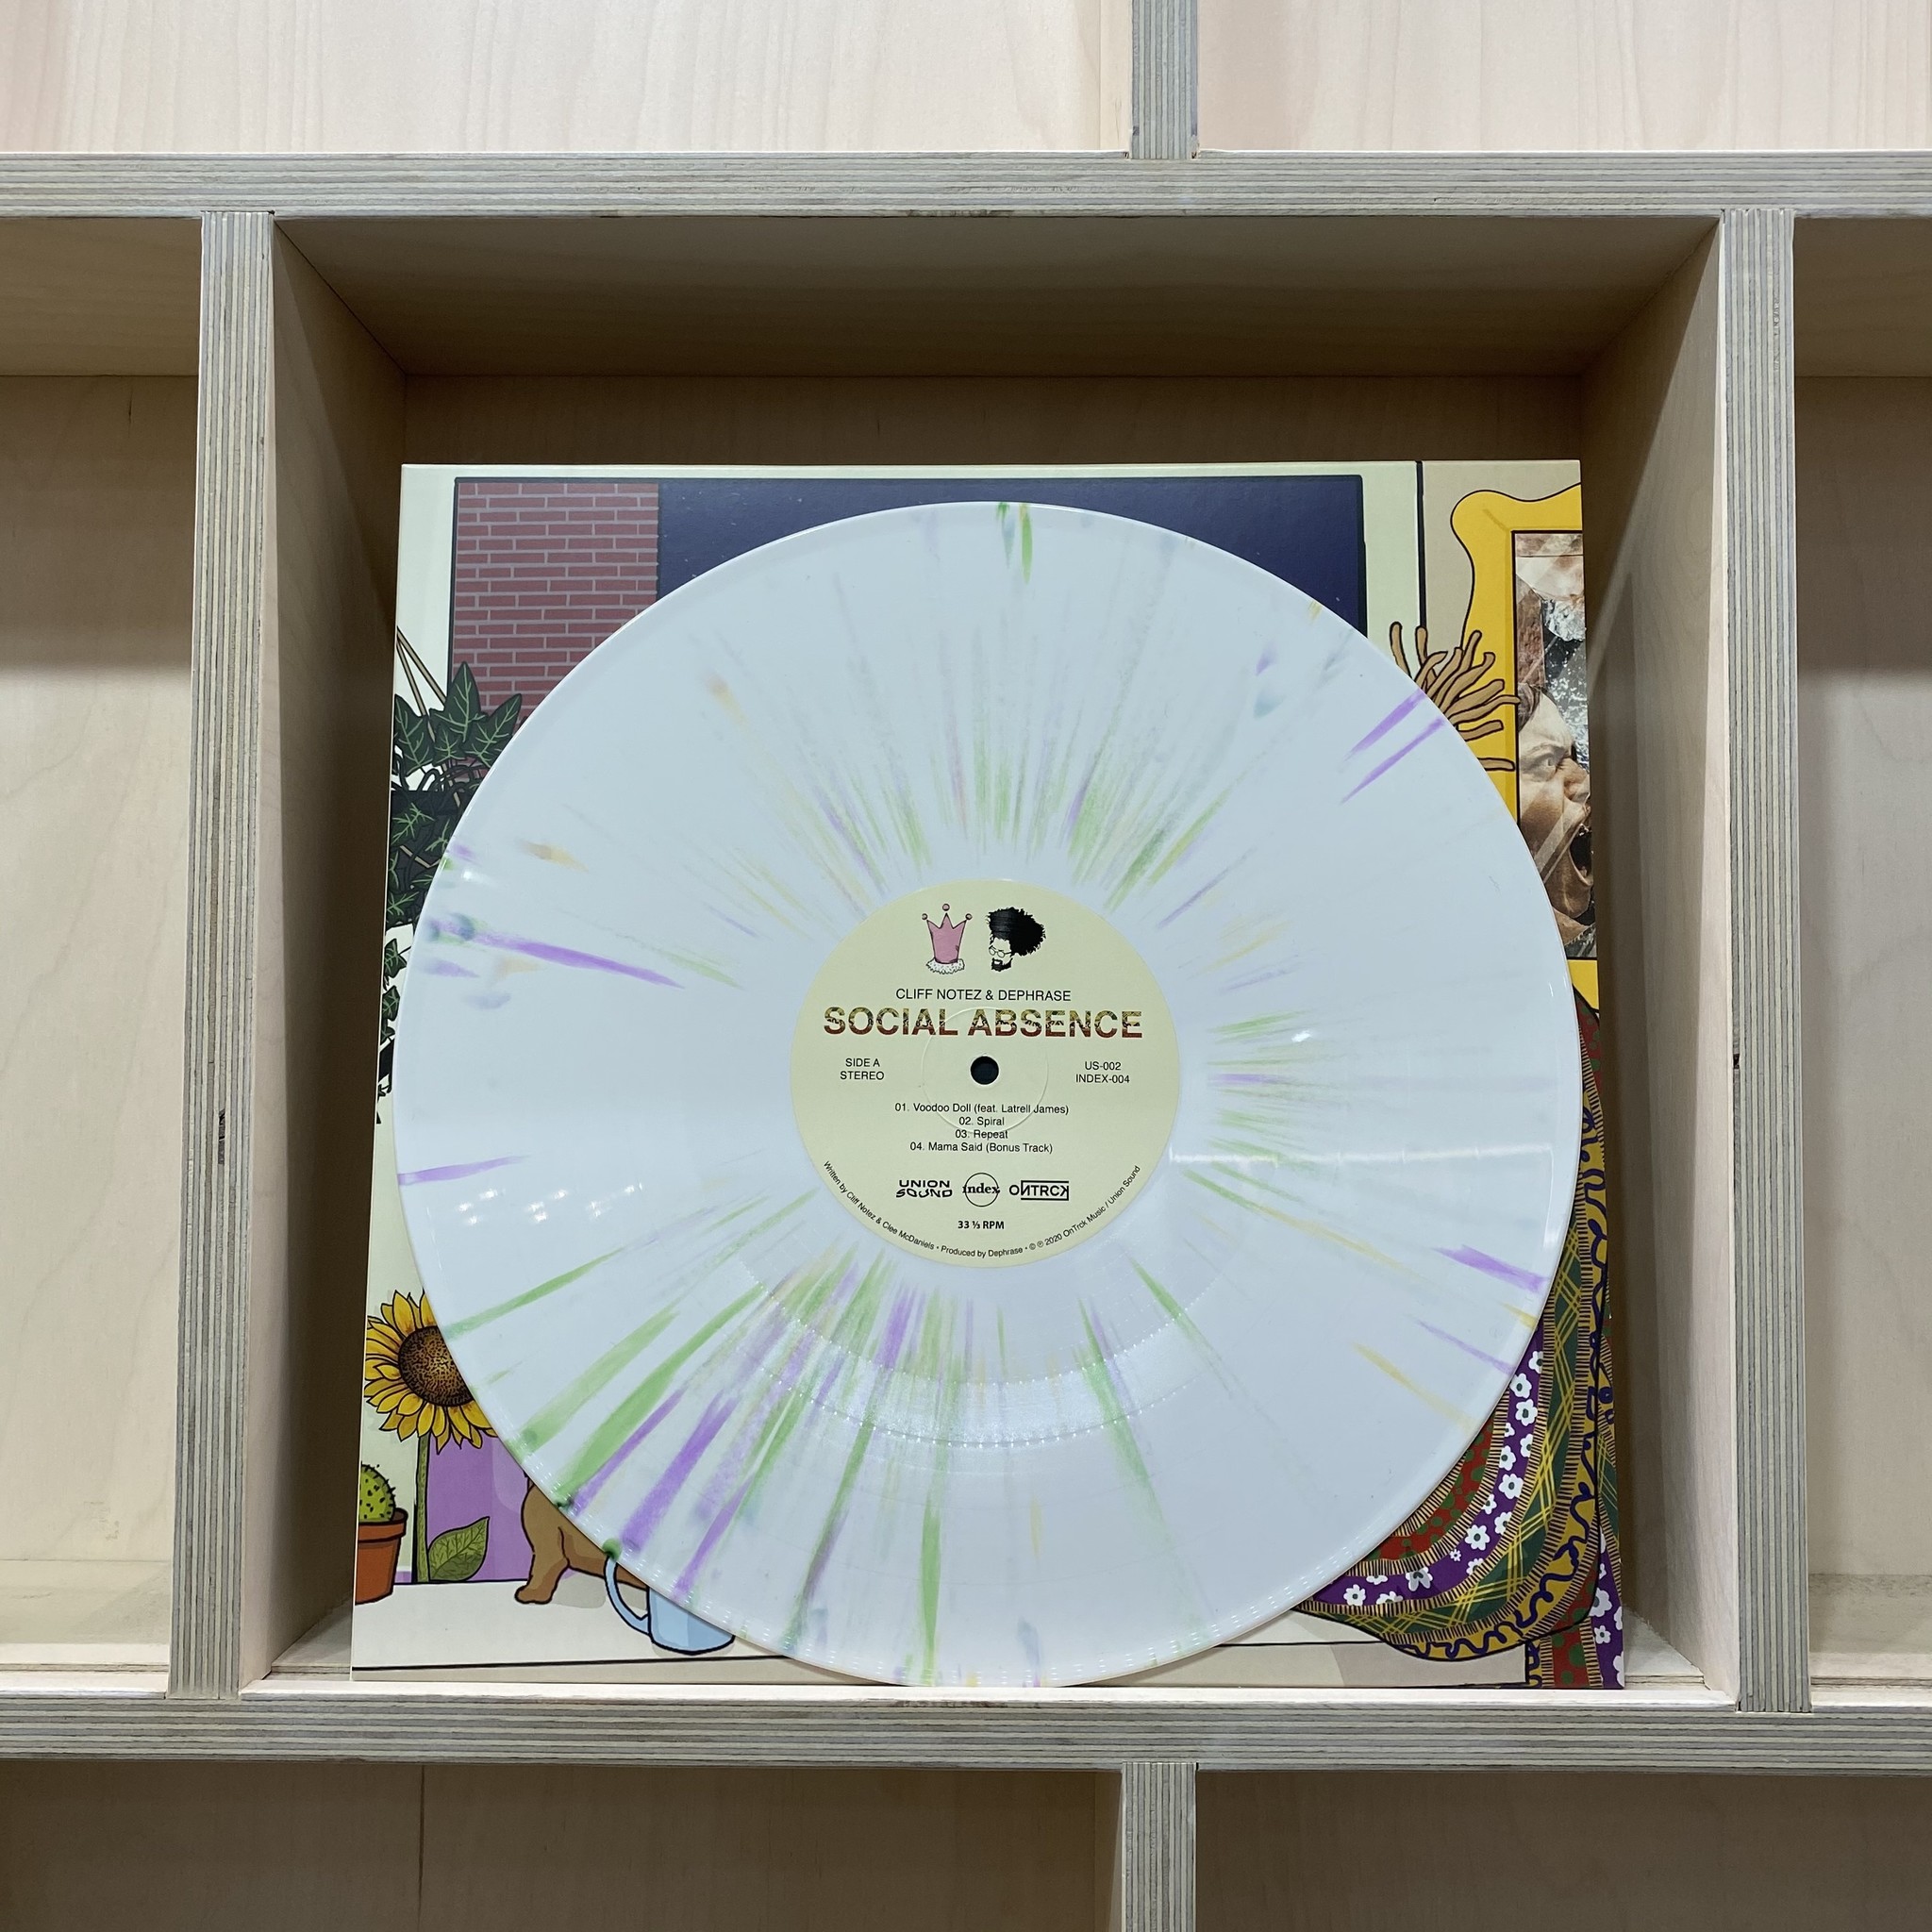 Cliff Notez & Dephrase - Social Absence - Vinyl, 12", EP, Limited Edition, White w/ Green, Yellow & Purple Splatter